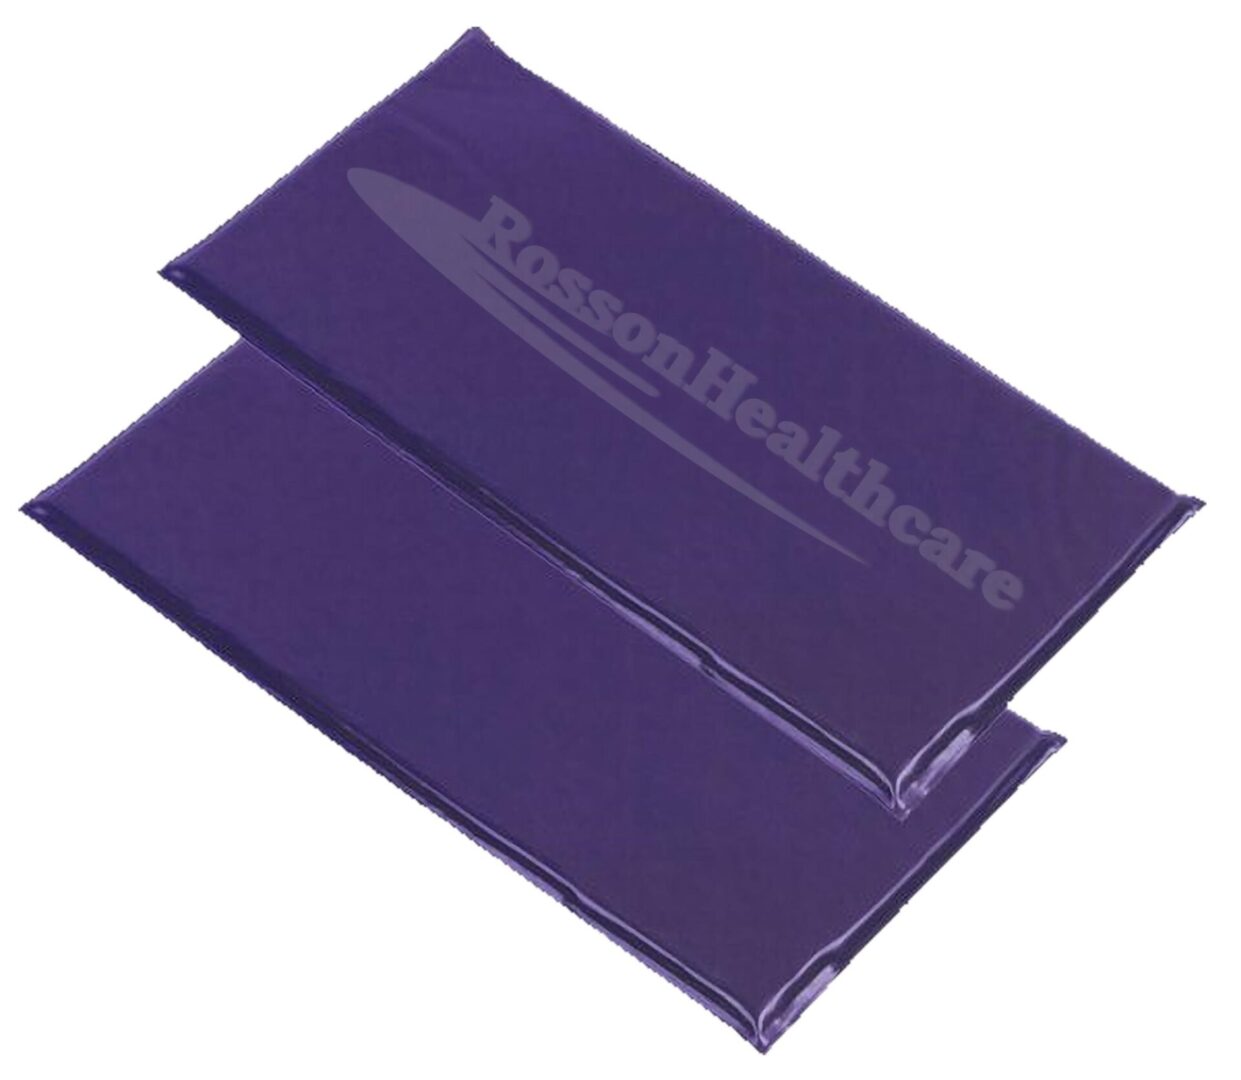 A purple sheet with the logo of boston healthcare.